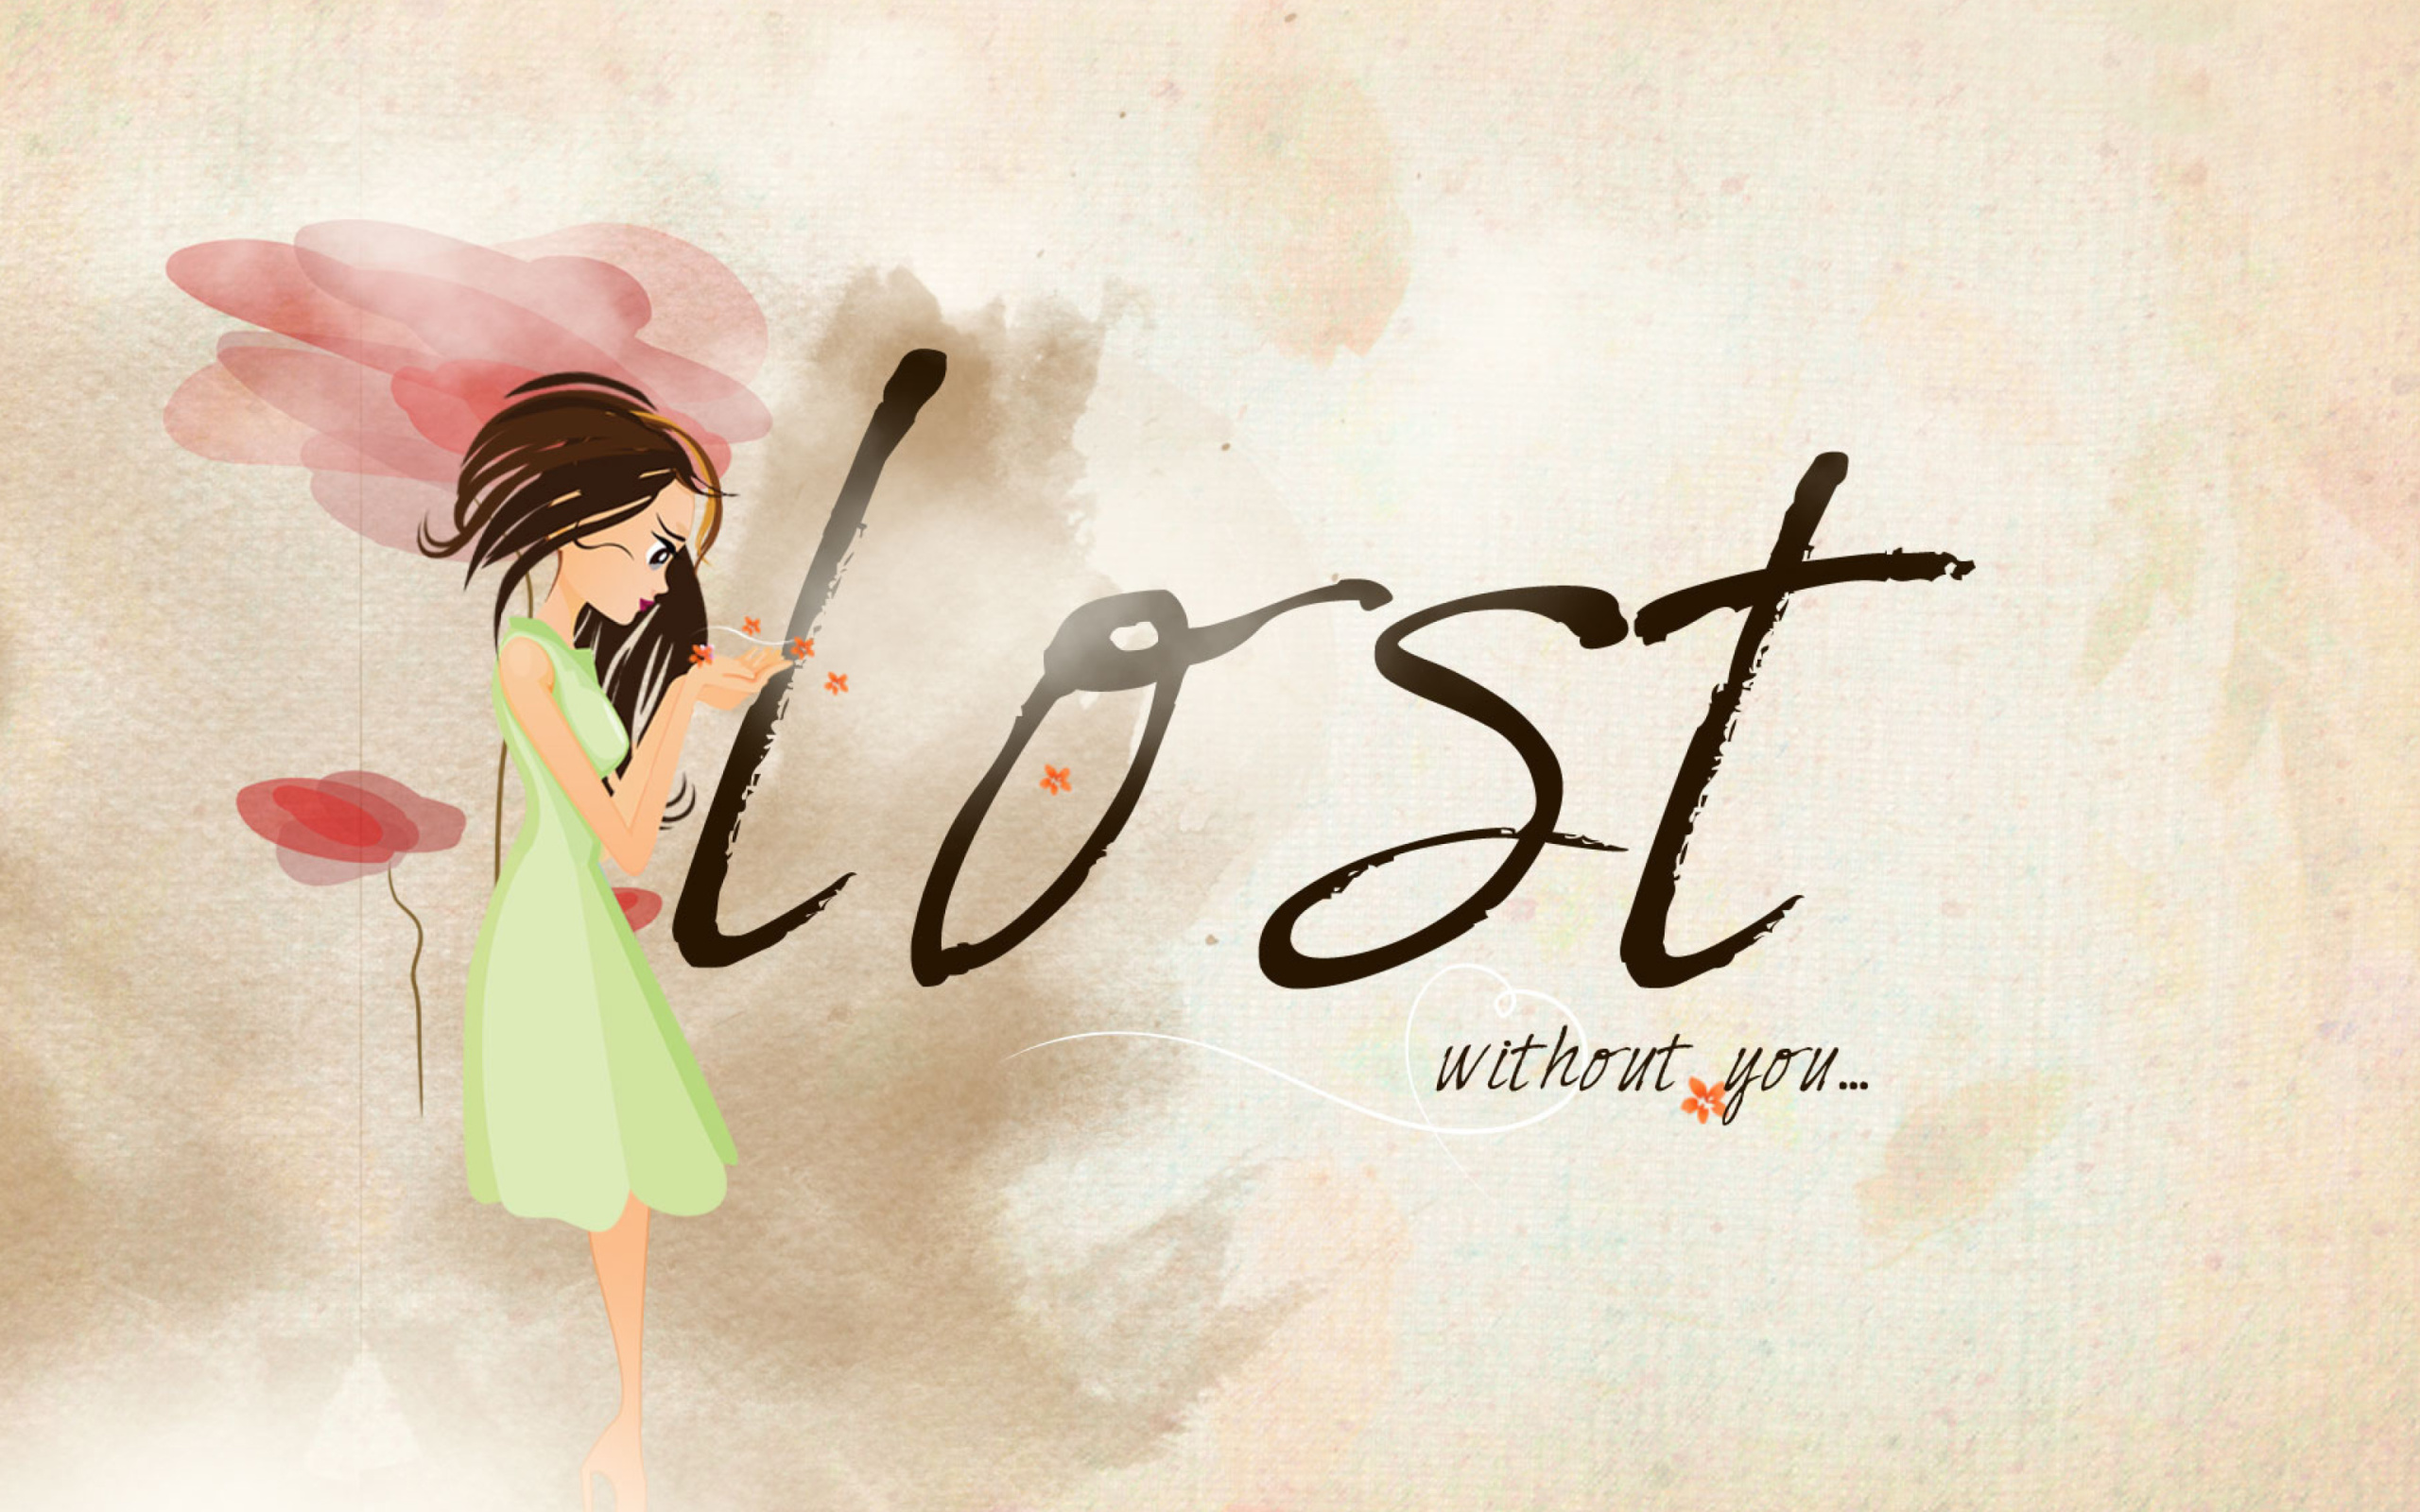 Das Lost Without You Wallpaper 2560x1600